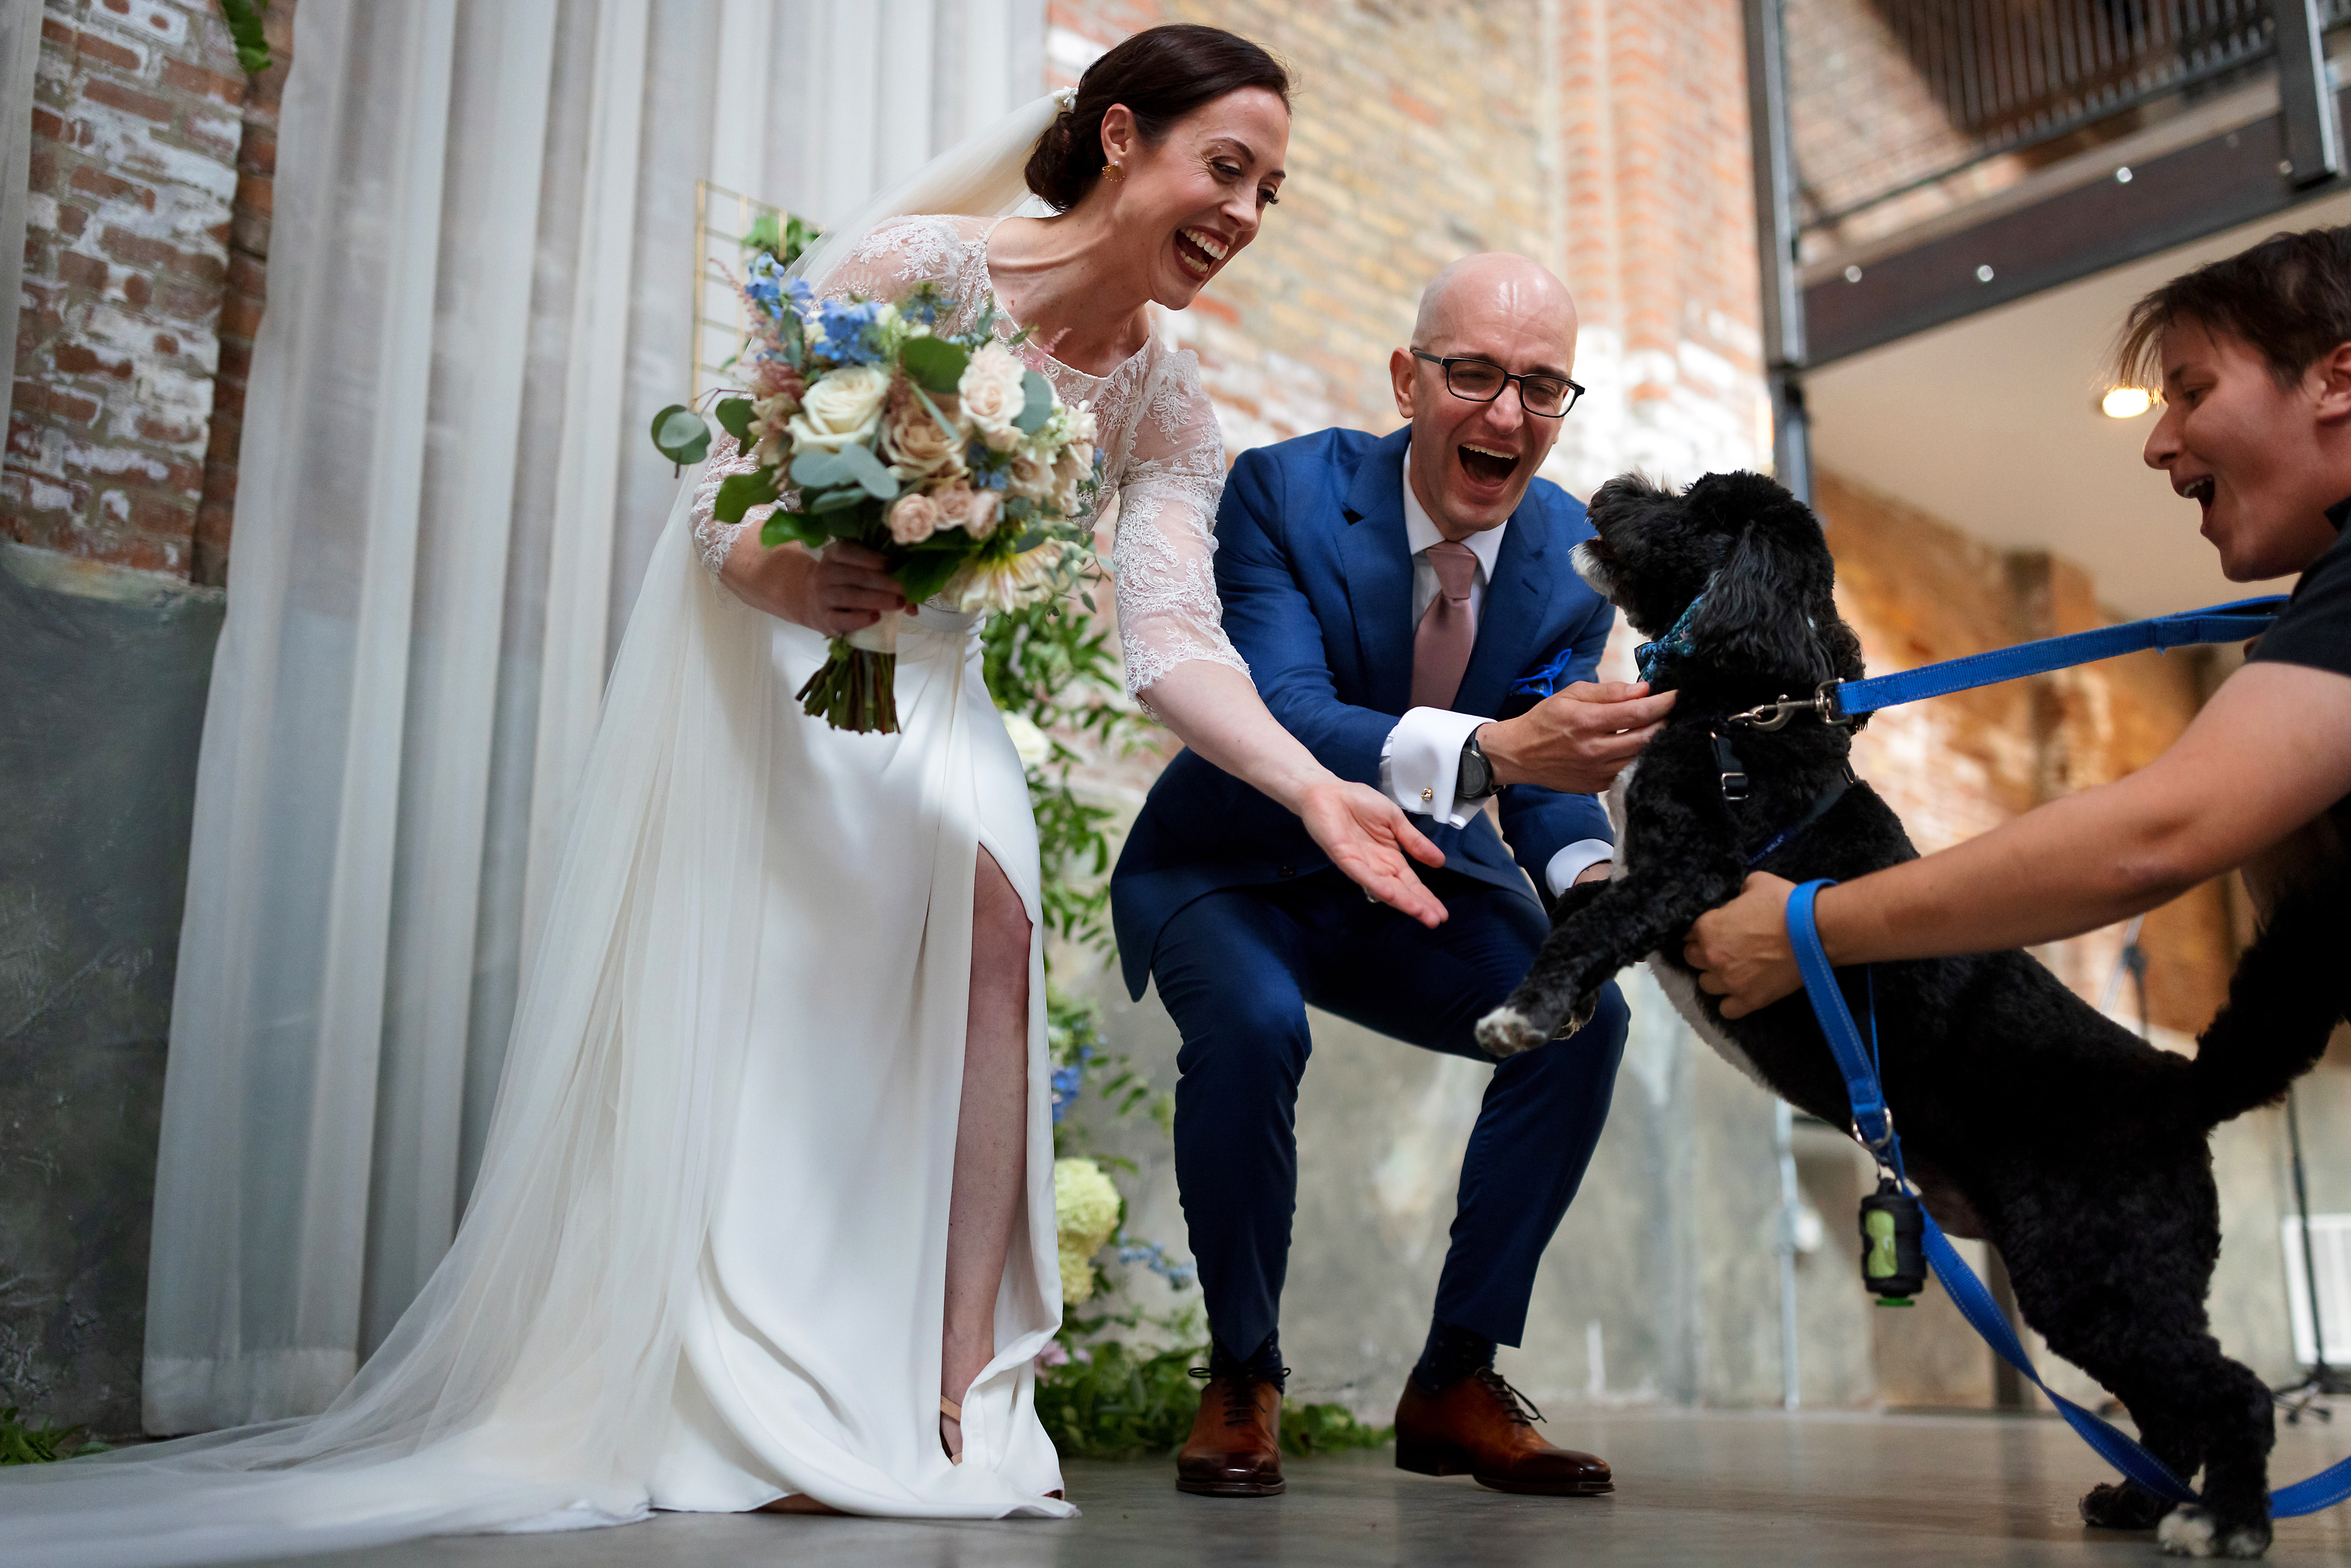 Bride and groom greet their dog during wedding